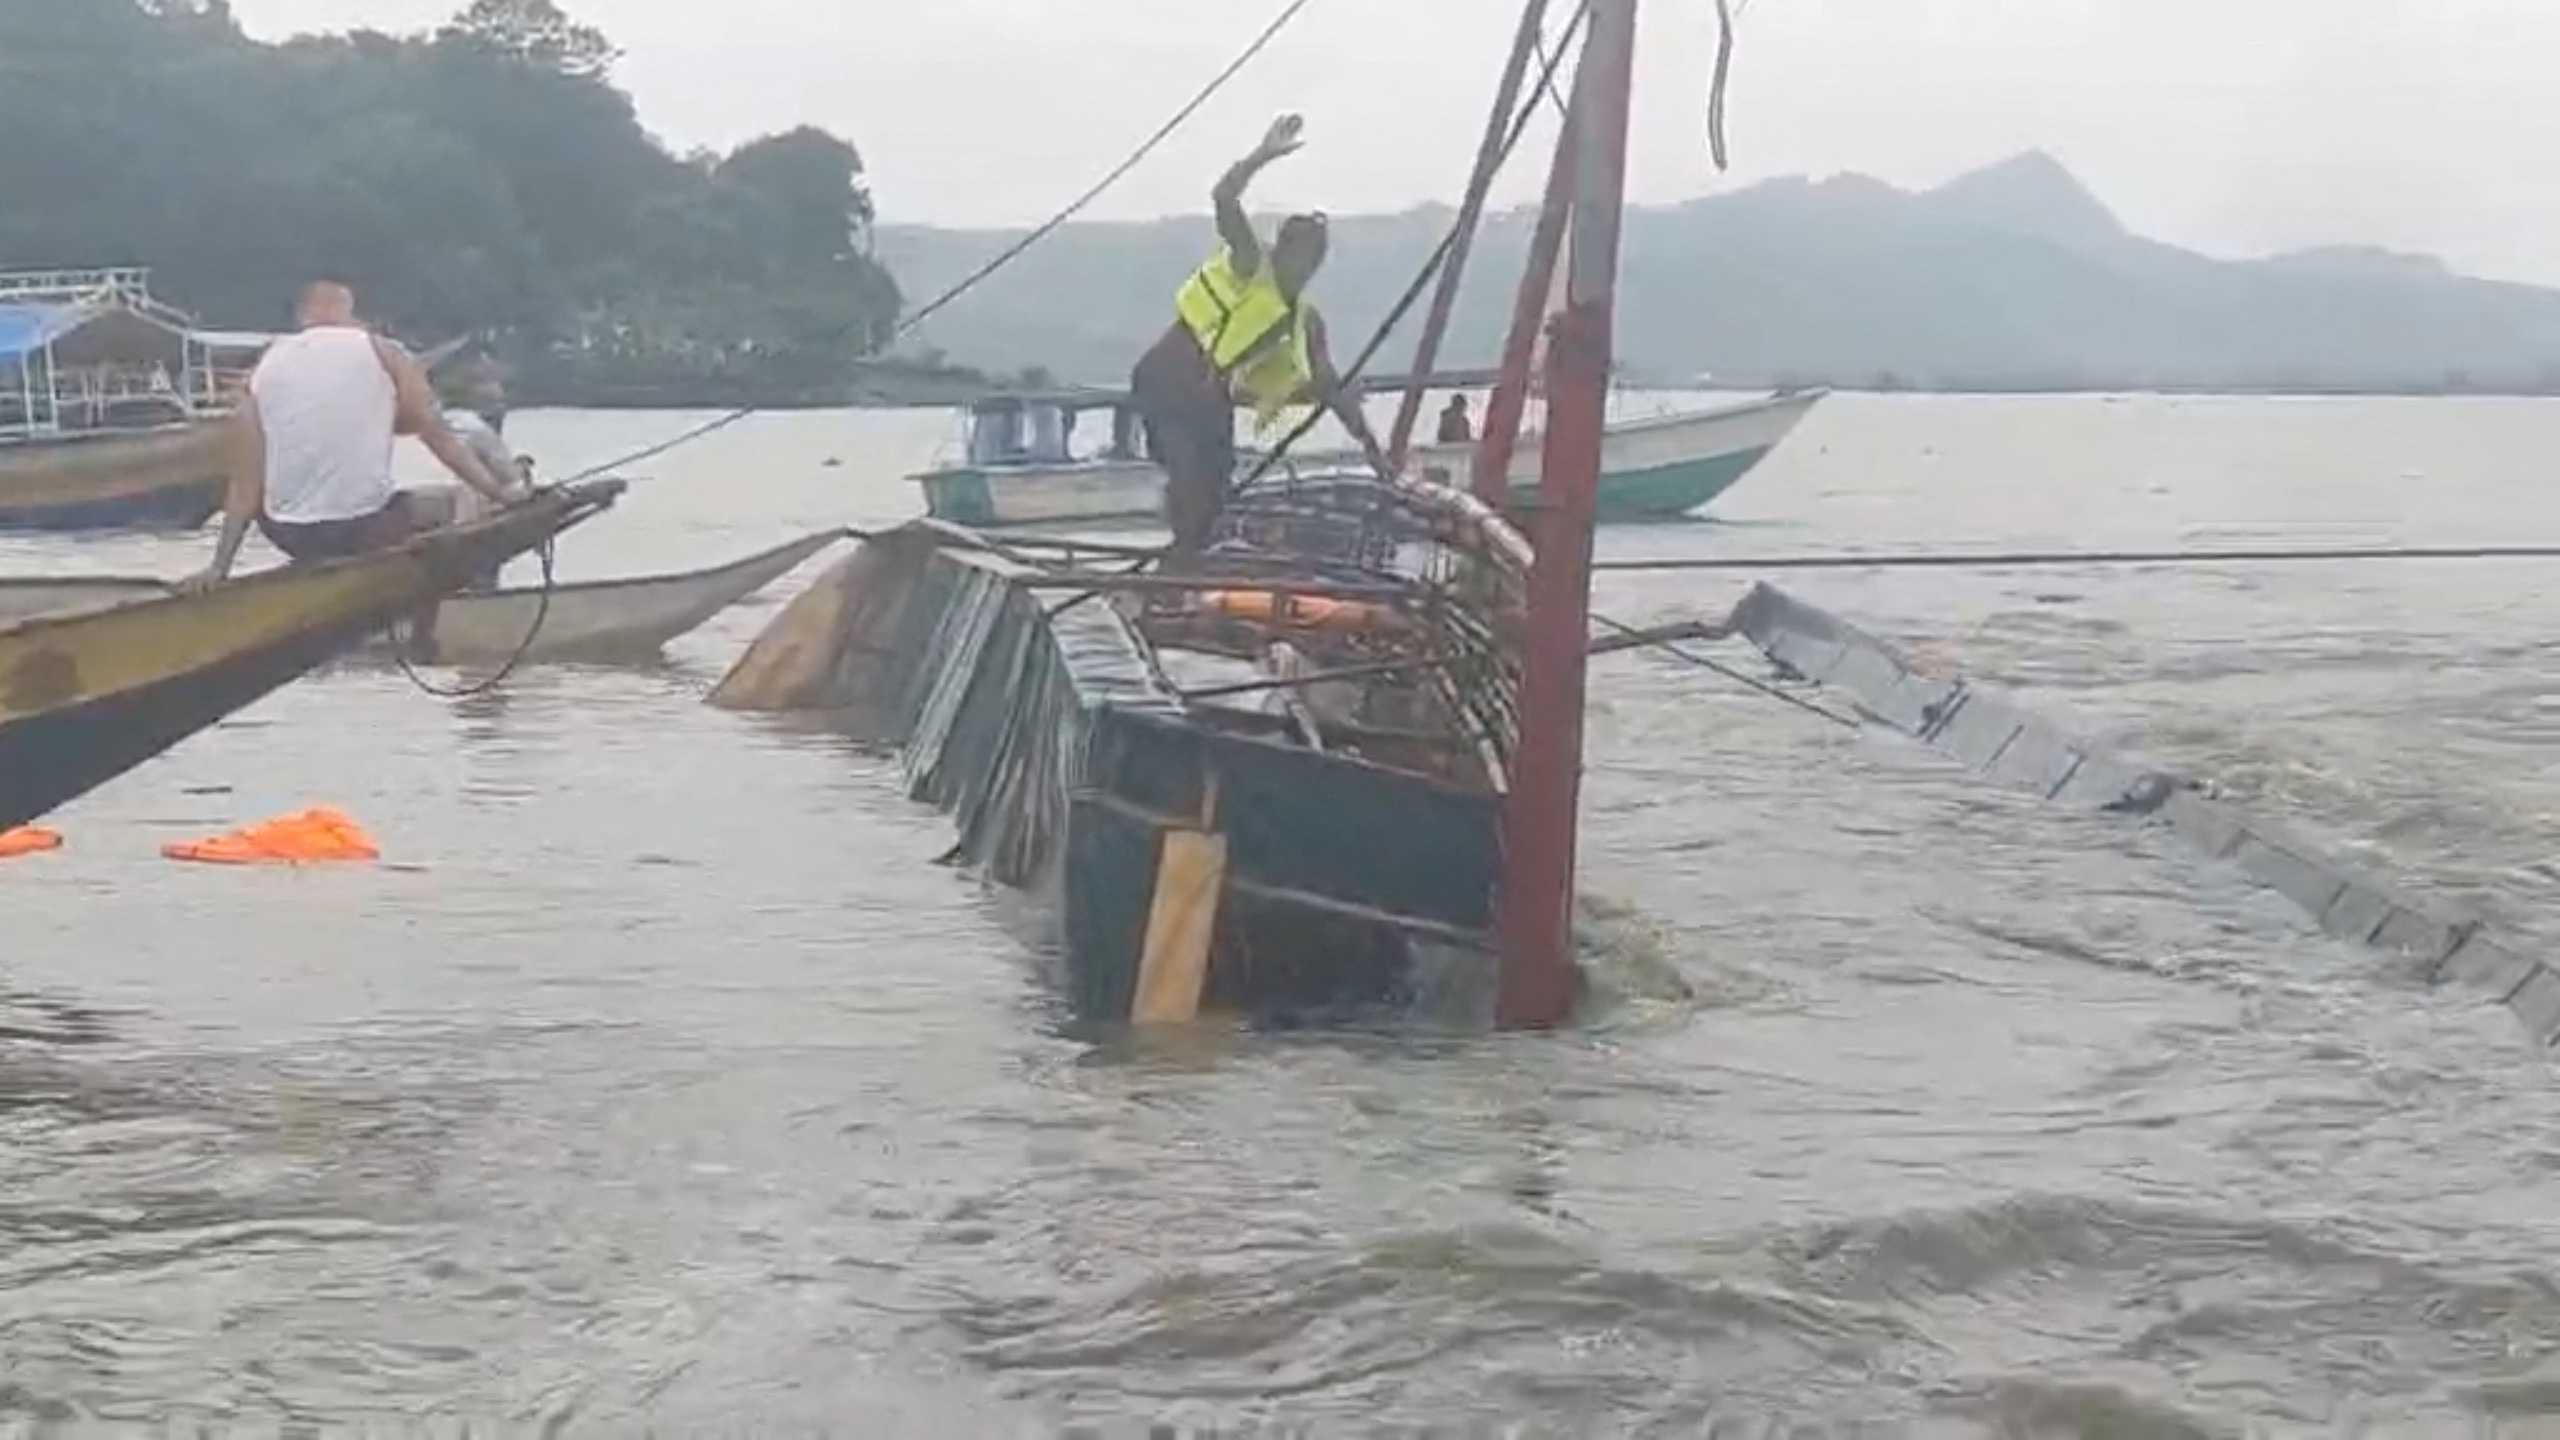 A man stands on the capsized passenger boat in Binangonan, Rizal province, Philippines, July 27, in this screen grab taken from a video by Philippine Coast Guard. Photo: Reuters